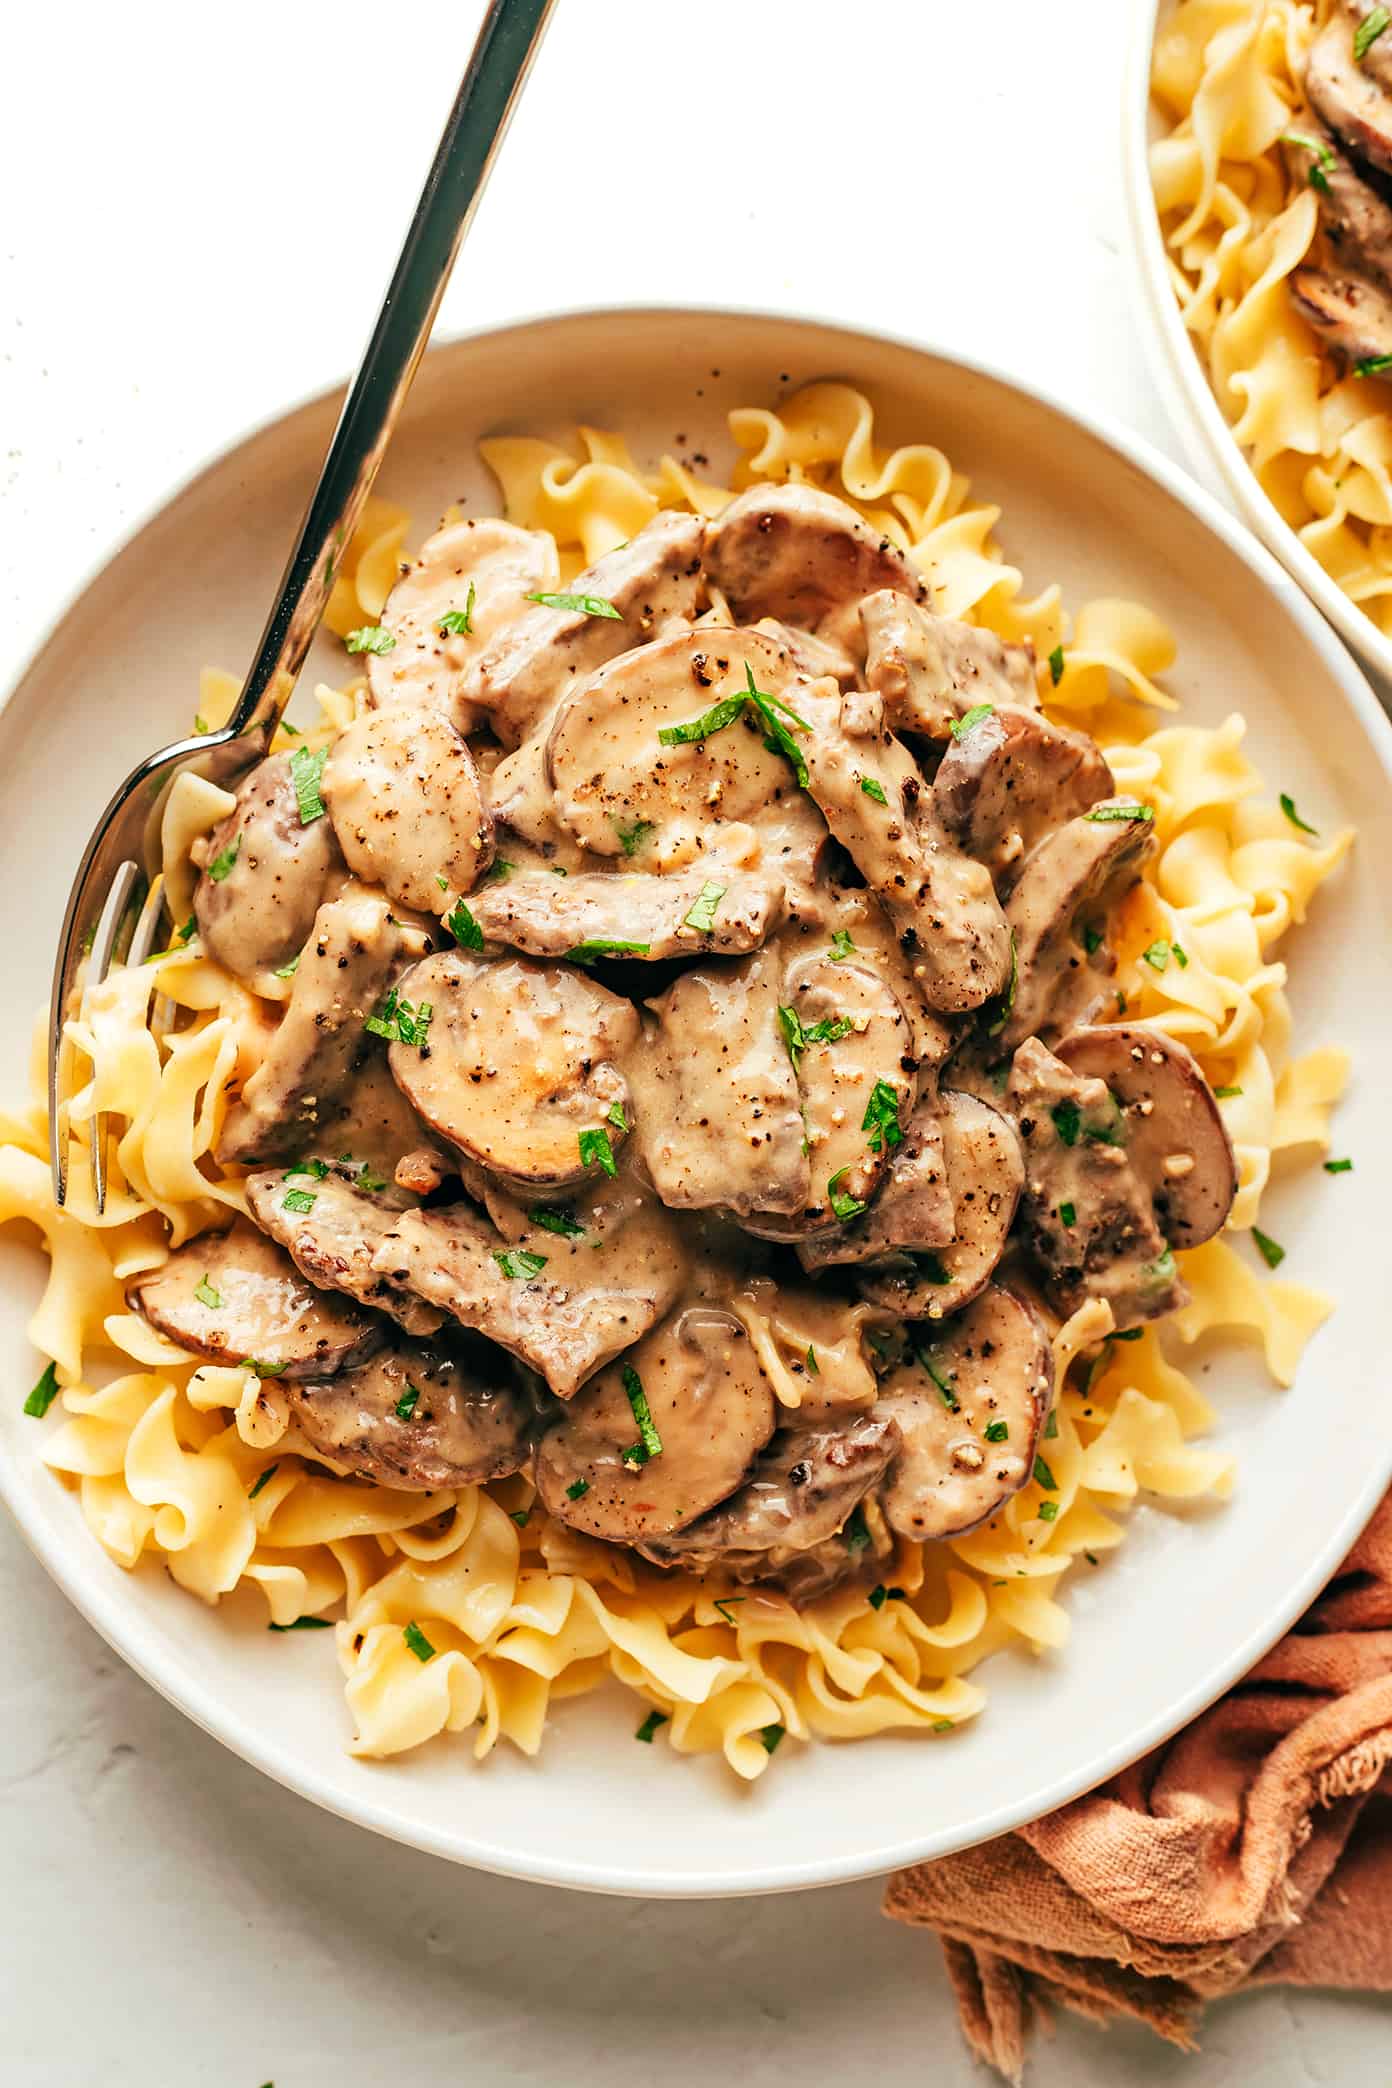 Beef stroganoff with noodles in bowl